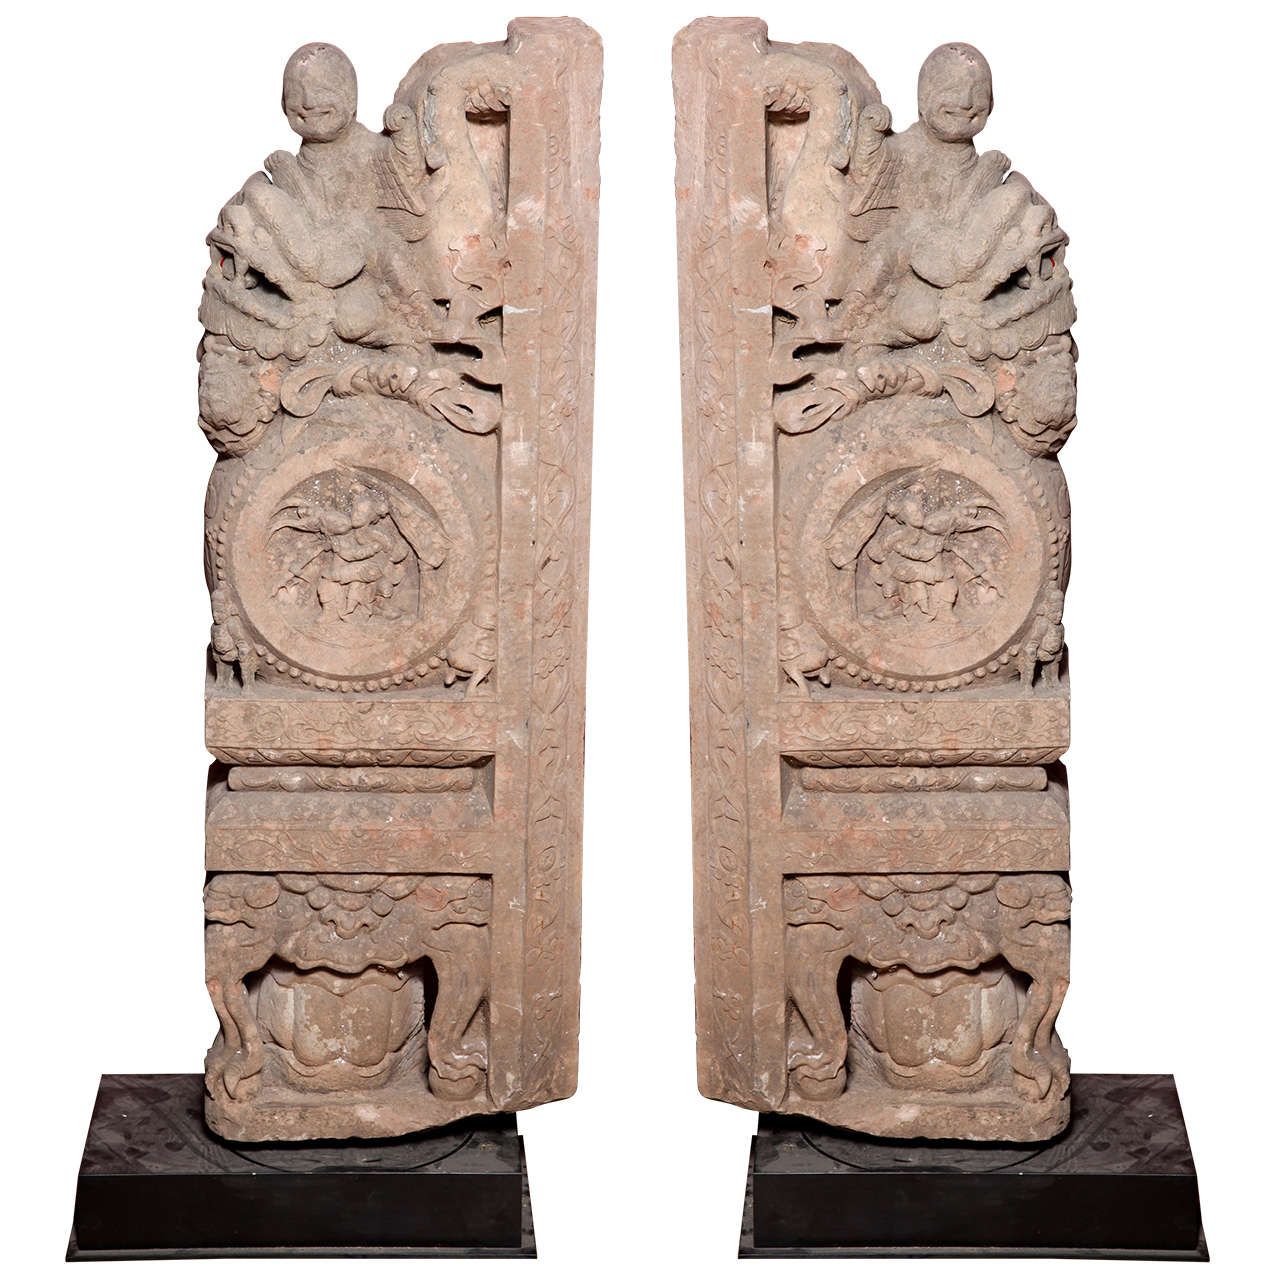 Ming Dynasty Antique Stone Architectural Carvings from a Chinese Temple